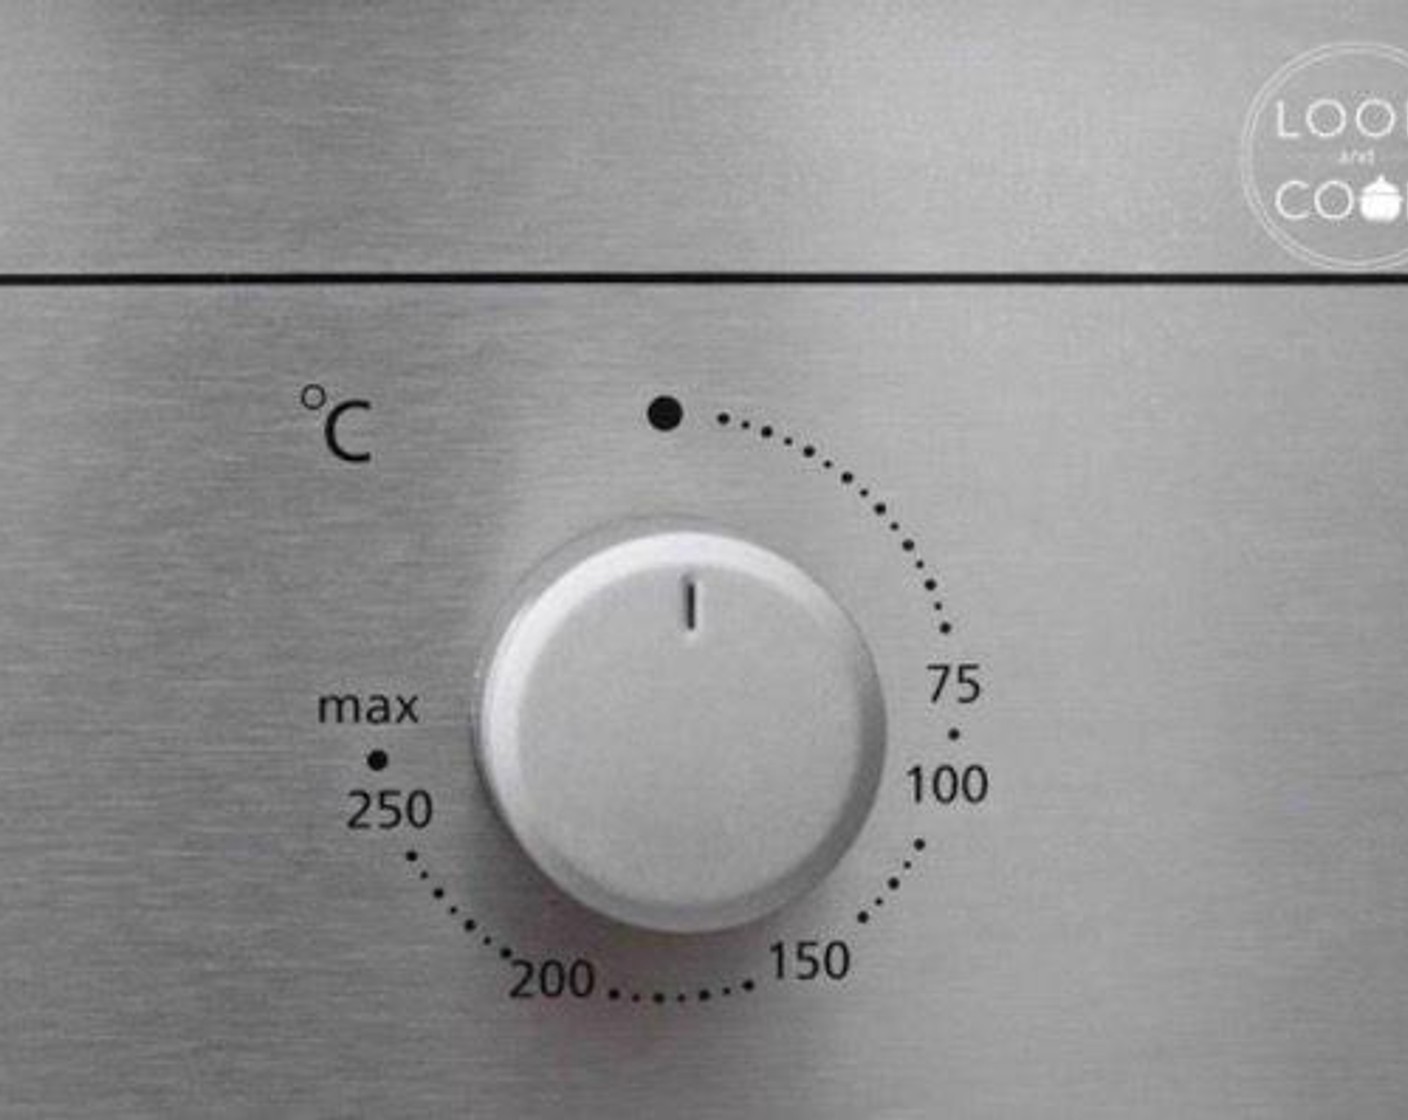 step 1 Preheat oven to 180 degrees C (350 degrees F).